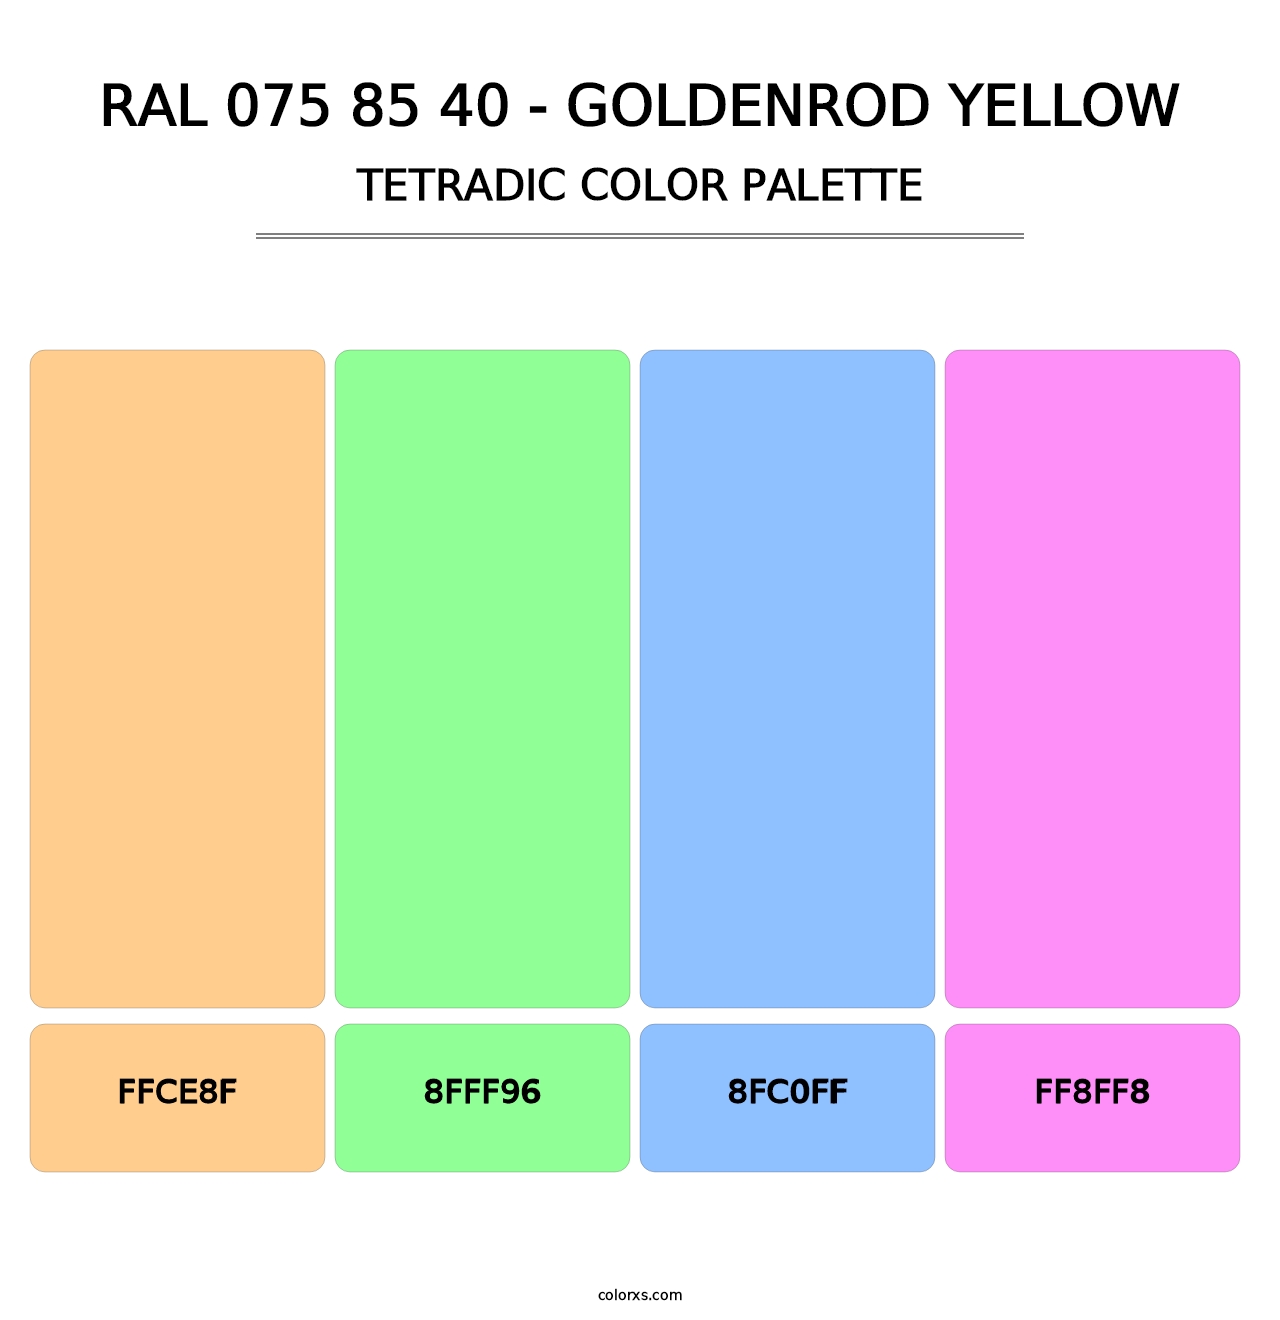 RAL 075 85 40 - Goldenrod Yellow - Tetradic Color Palette